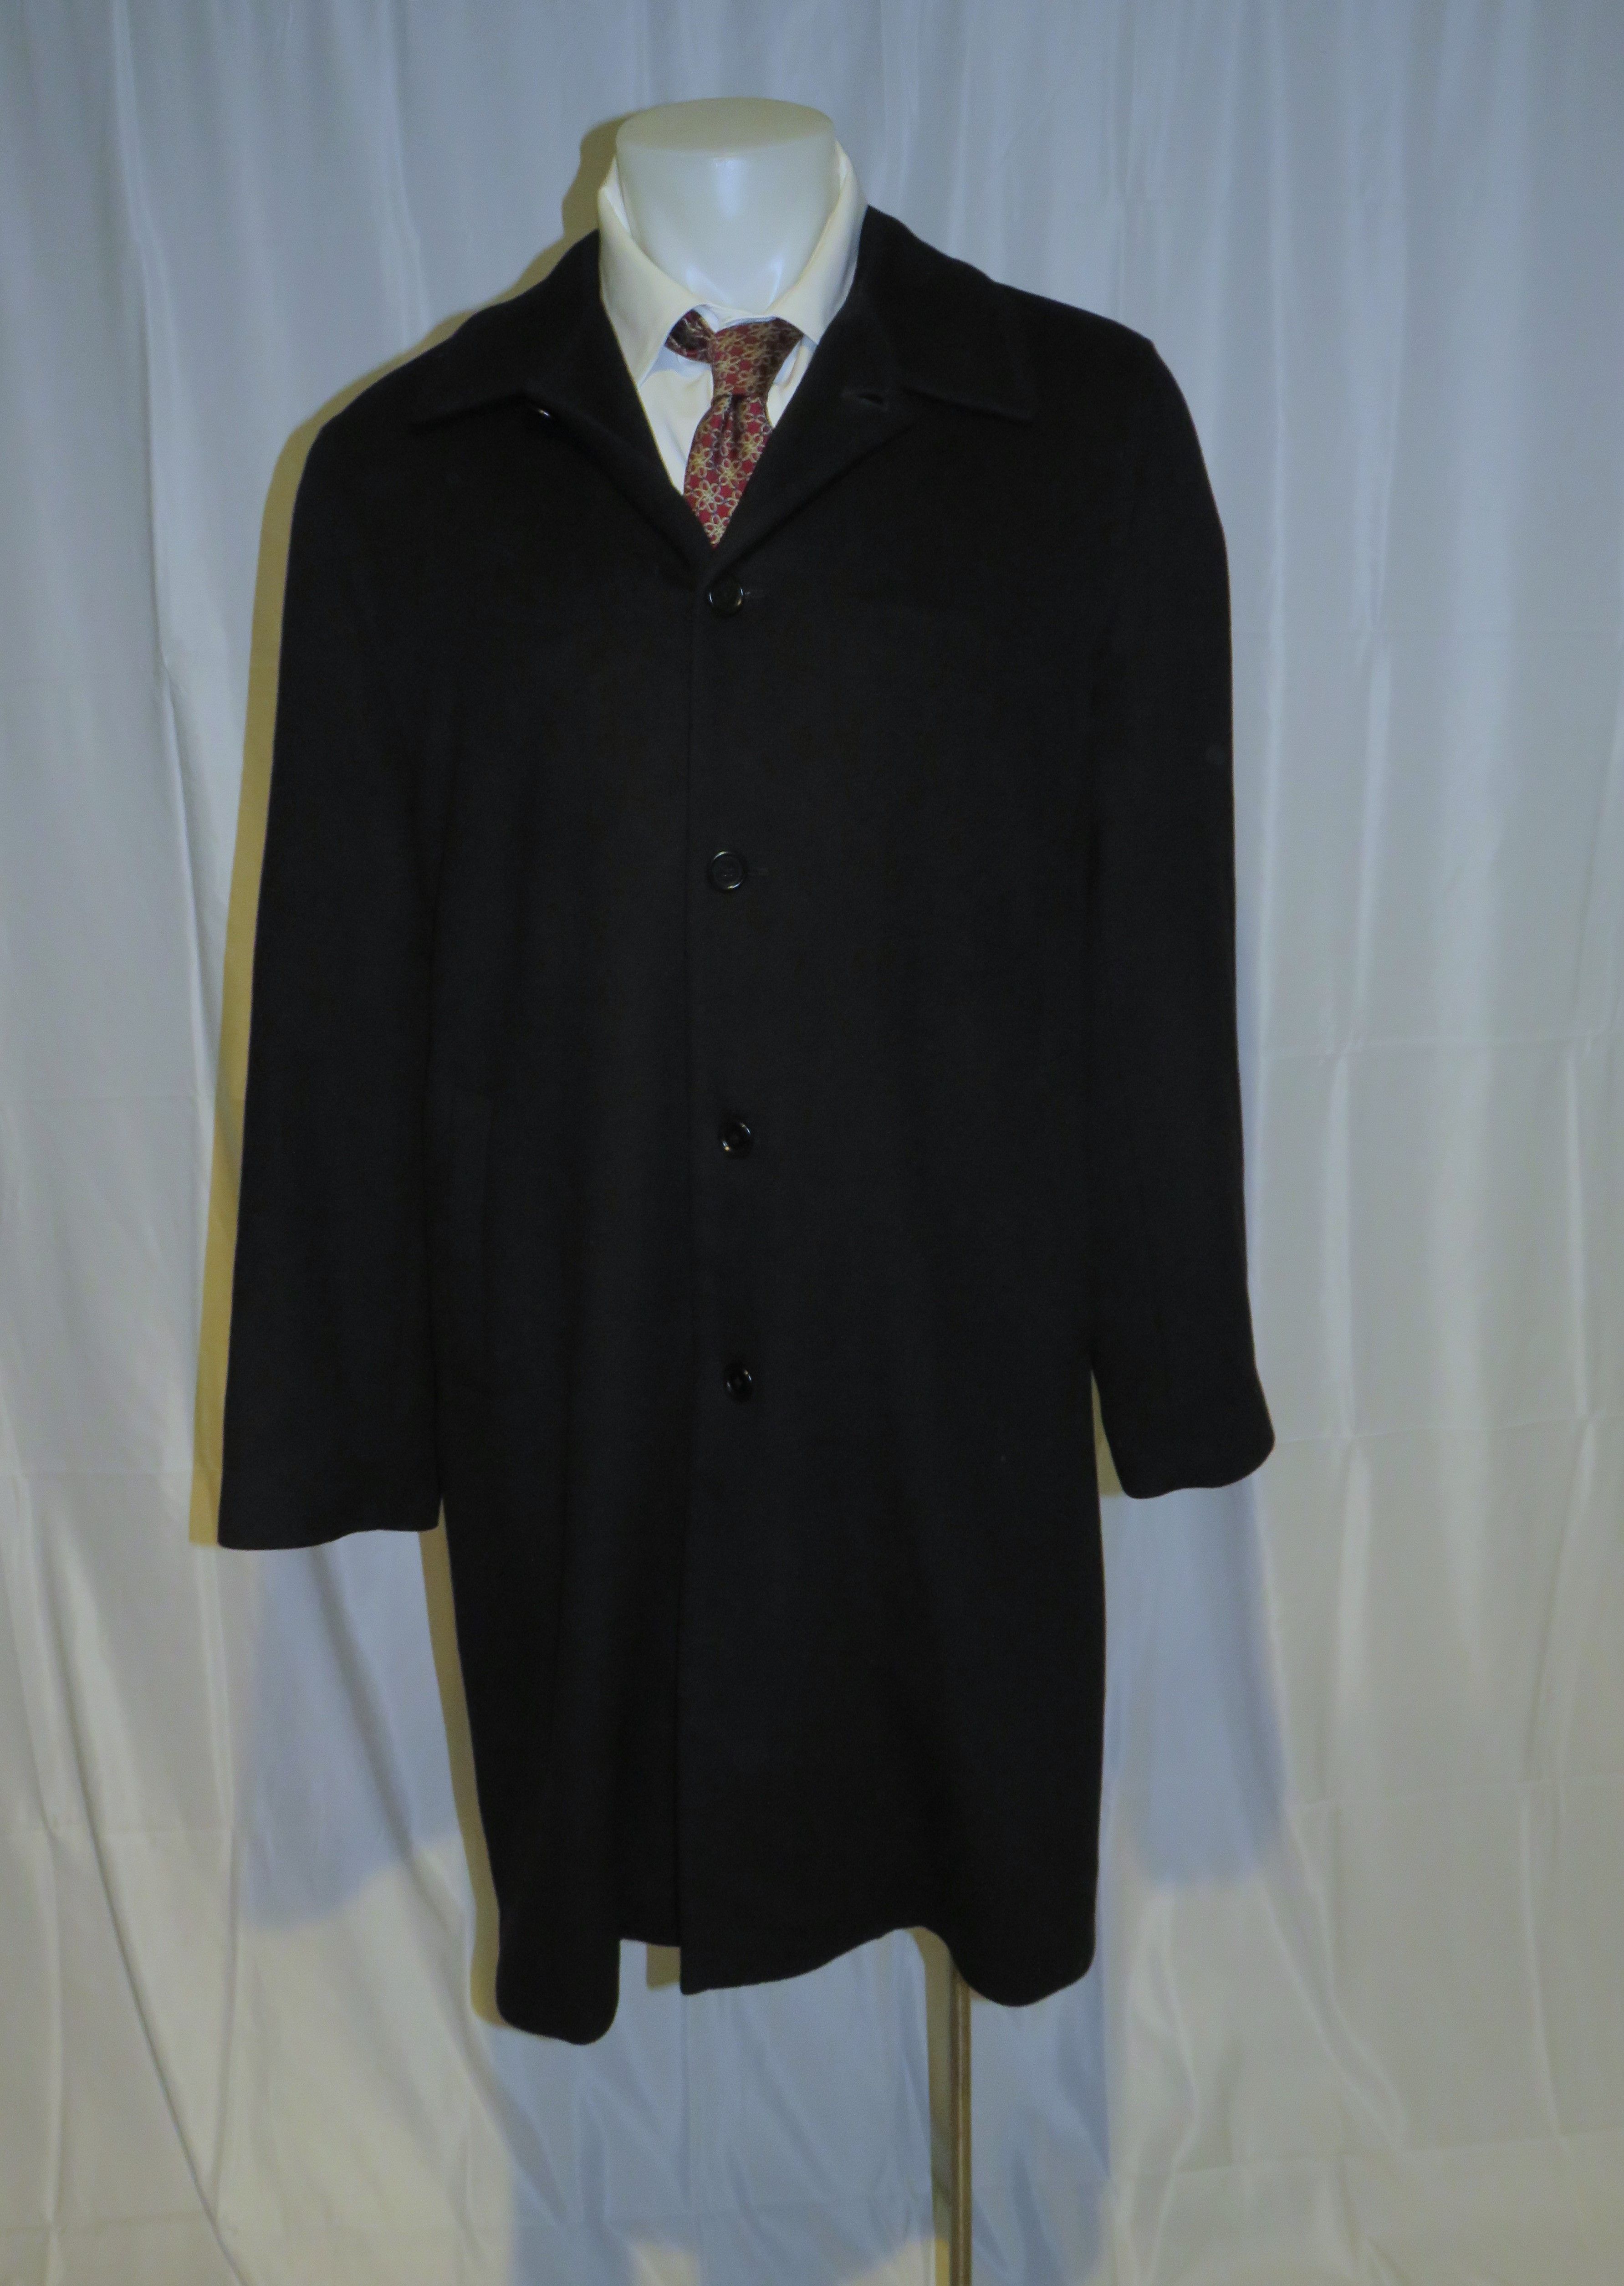 Other Great Scott Angora Blend Black Brushed Flannel Top Coat 46 Size US XL / EU 56 / 4 - 1 Preview